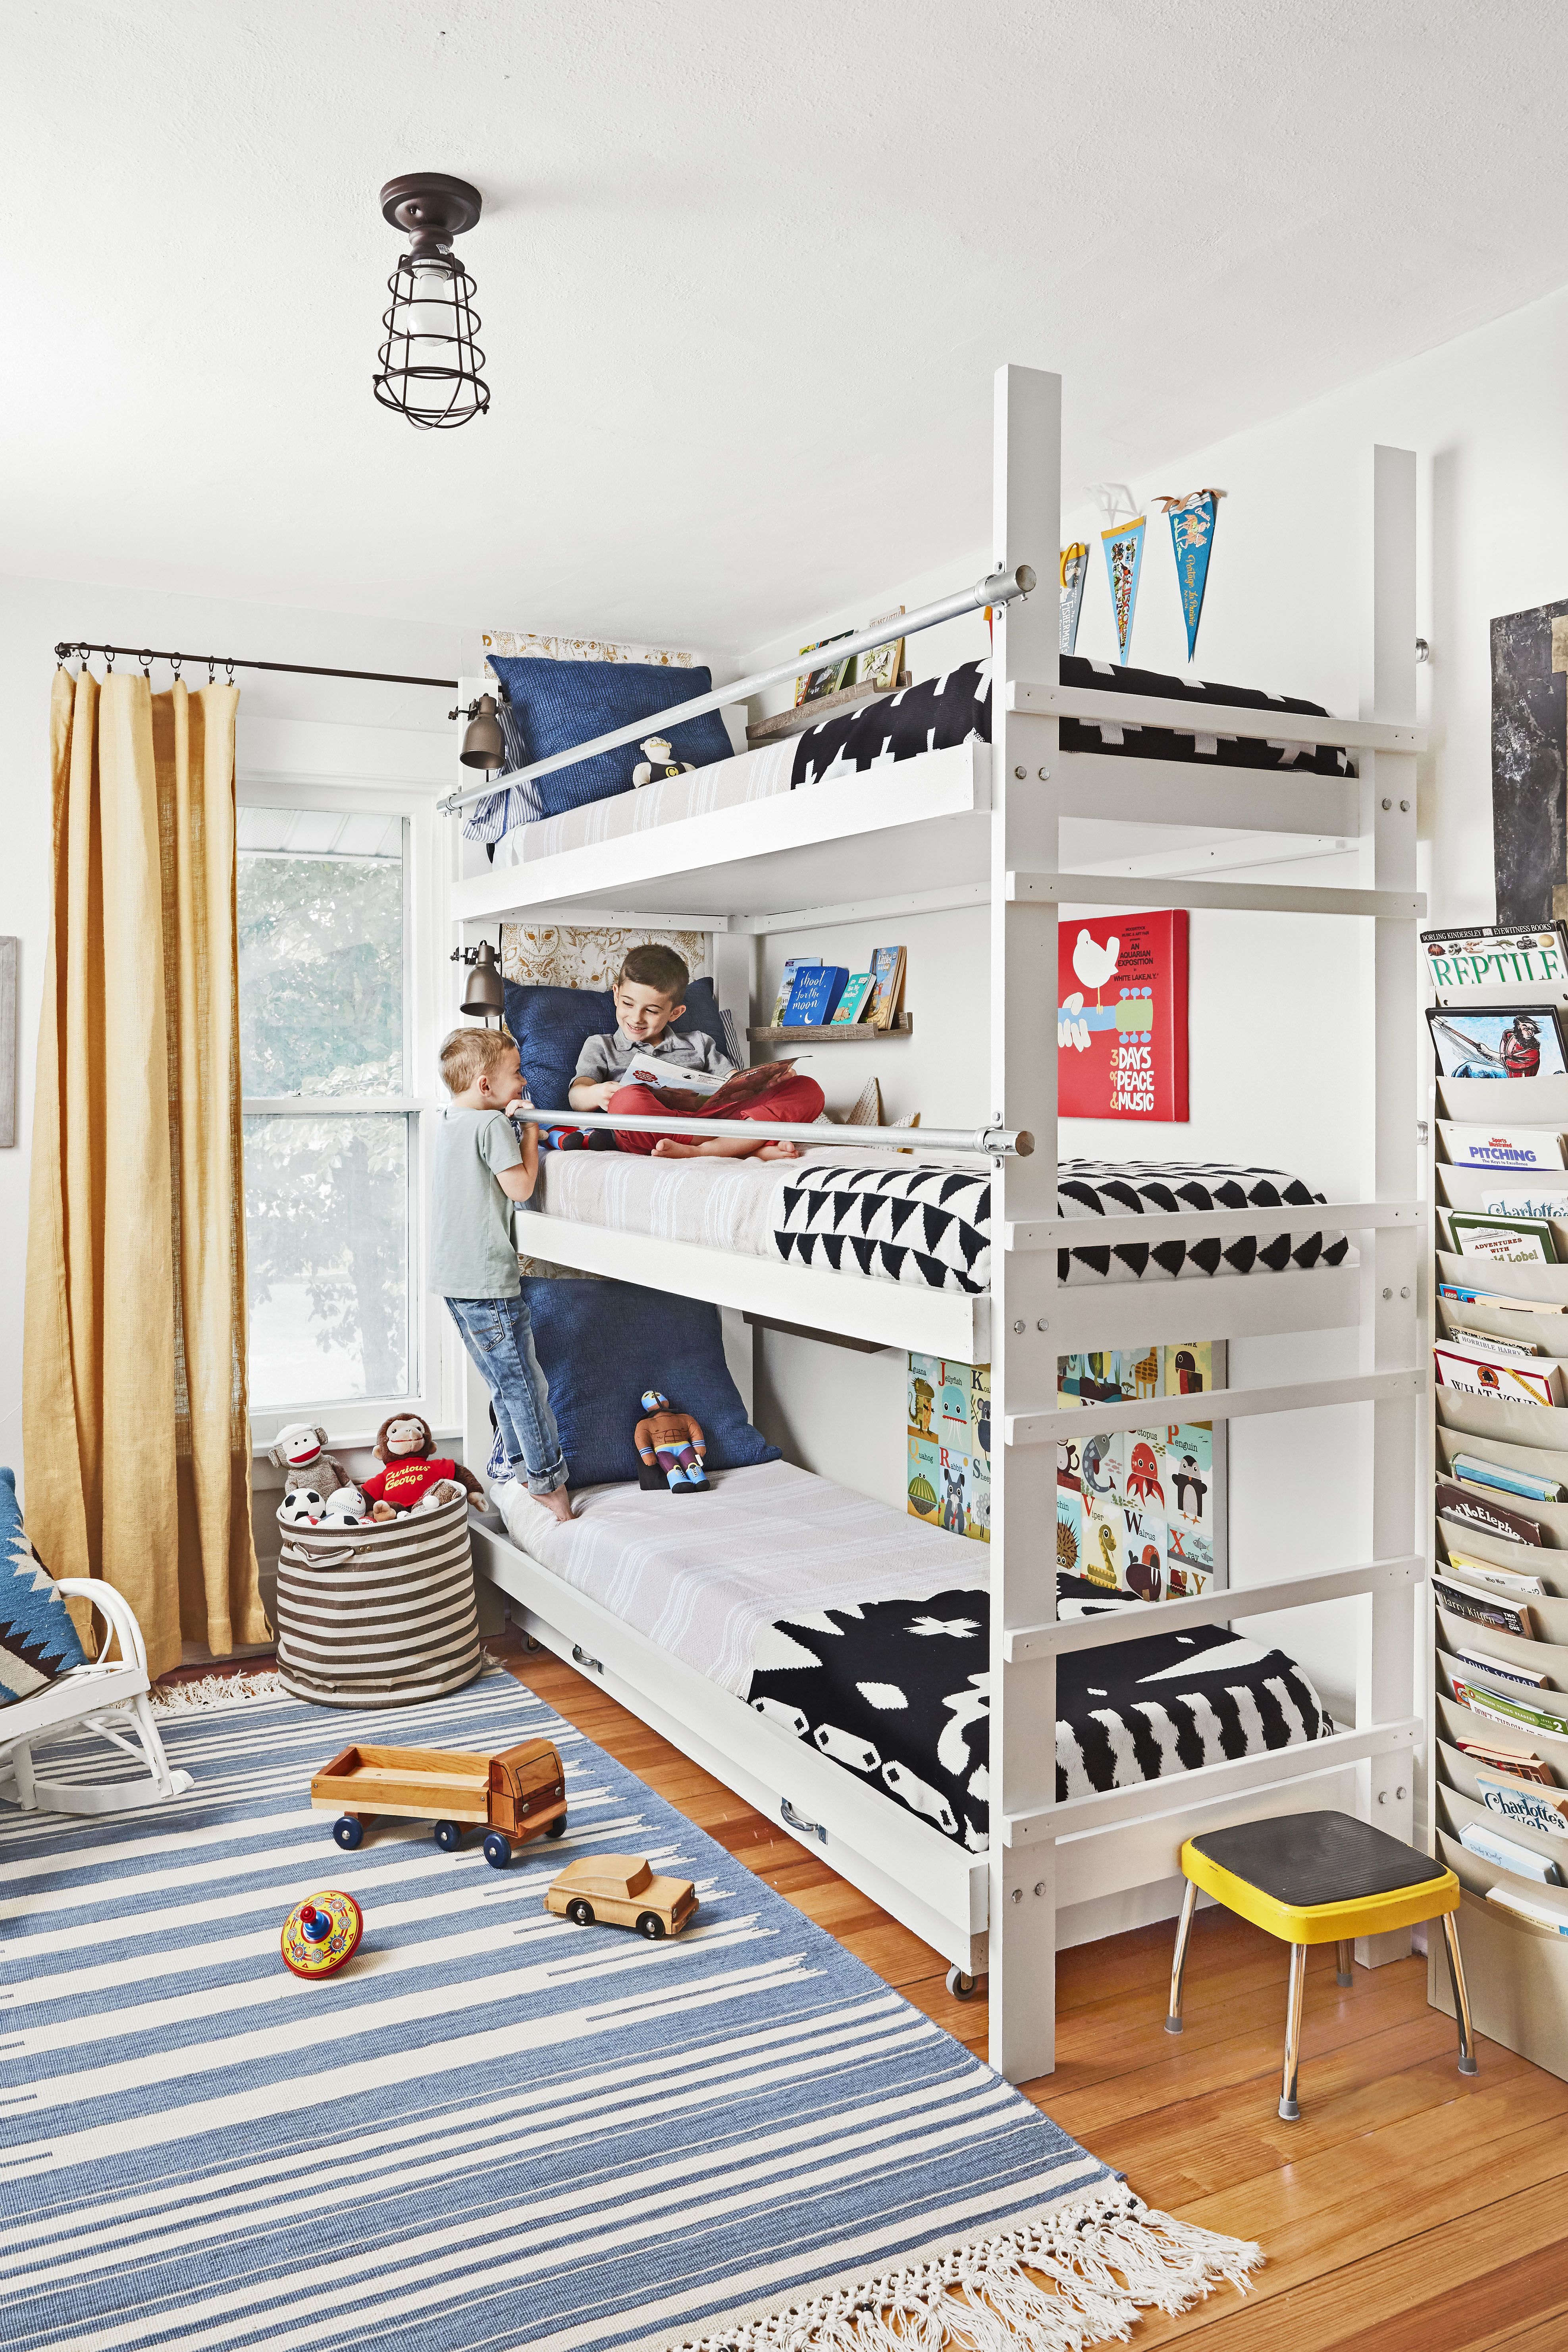 30 Best Kids Room Ideas Diy Boys And, Boy And Girl Room With Bunk Bed